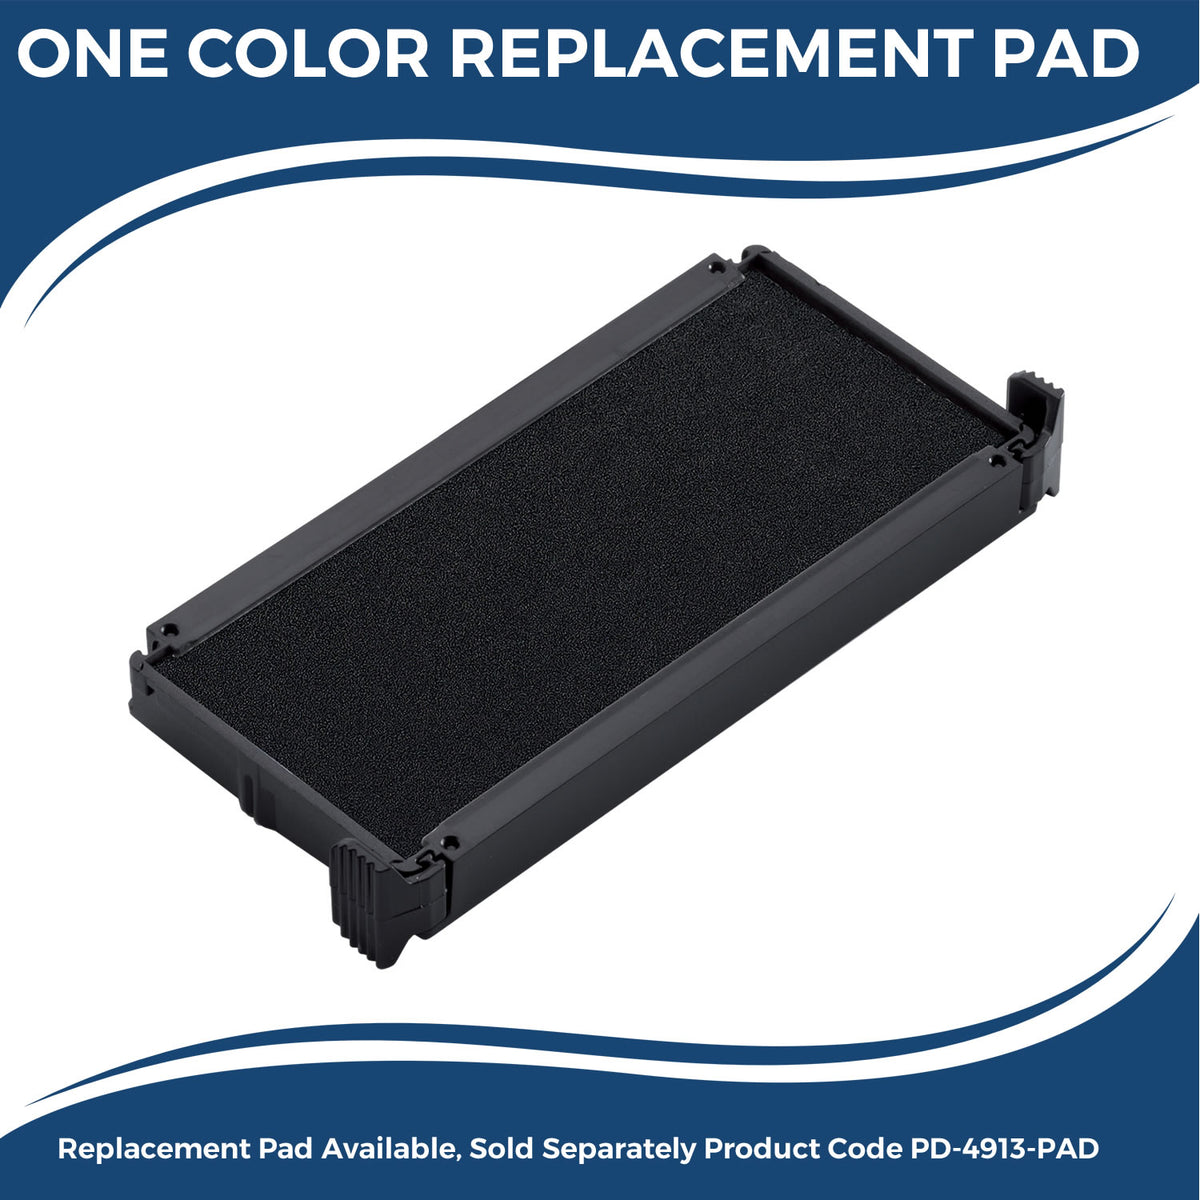 Large Self-Inking Outline Personal Stamp 4956S Large Replacment Pad